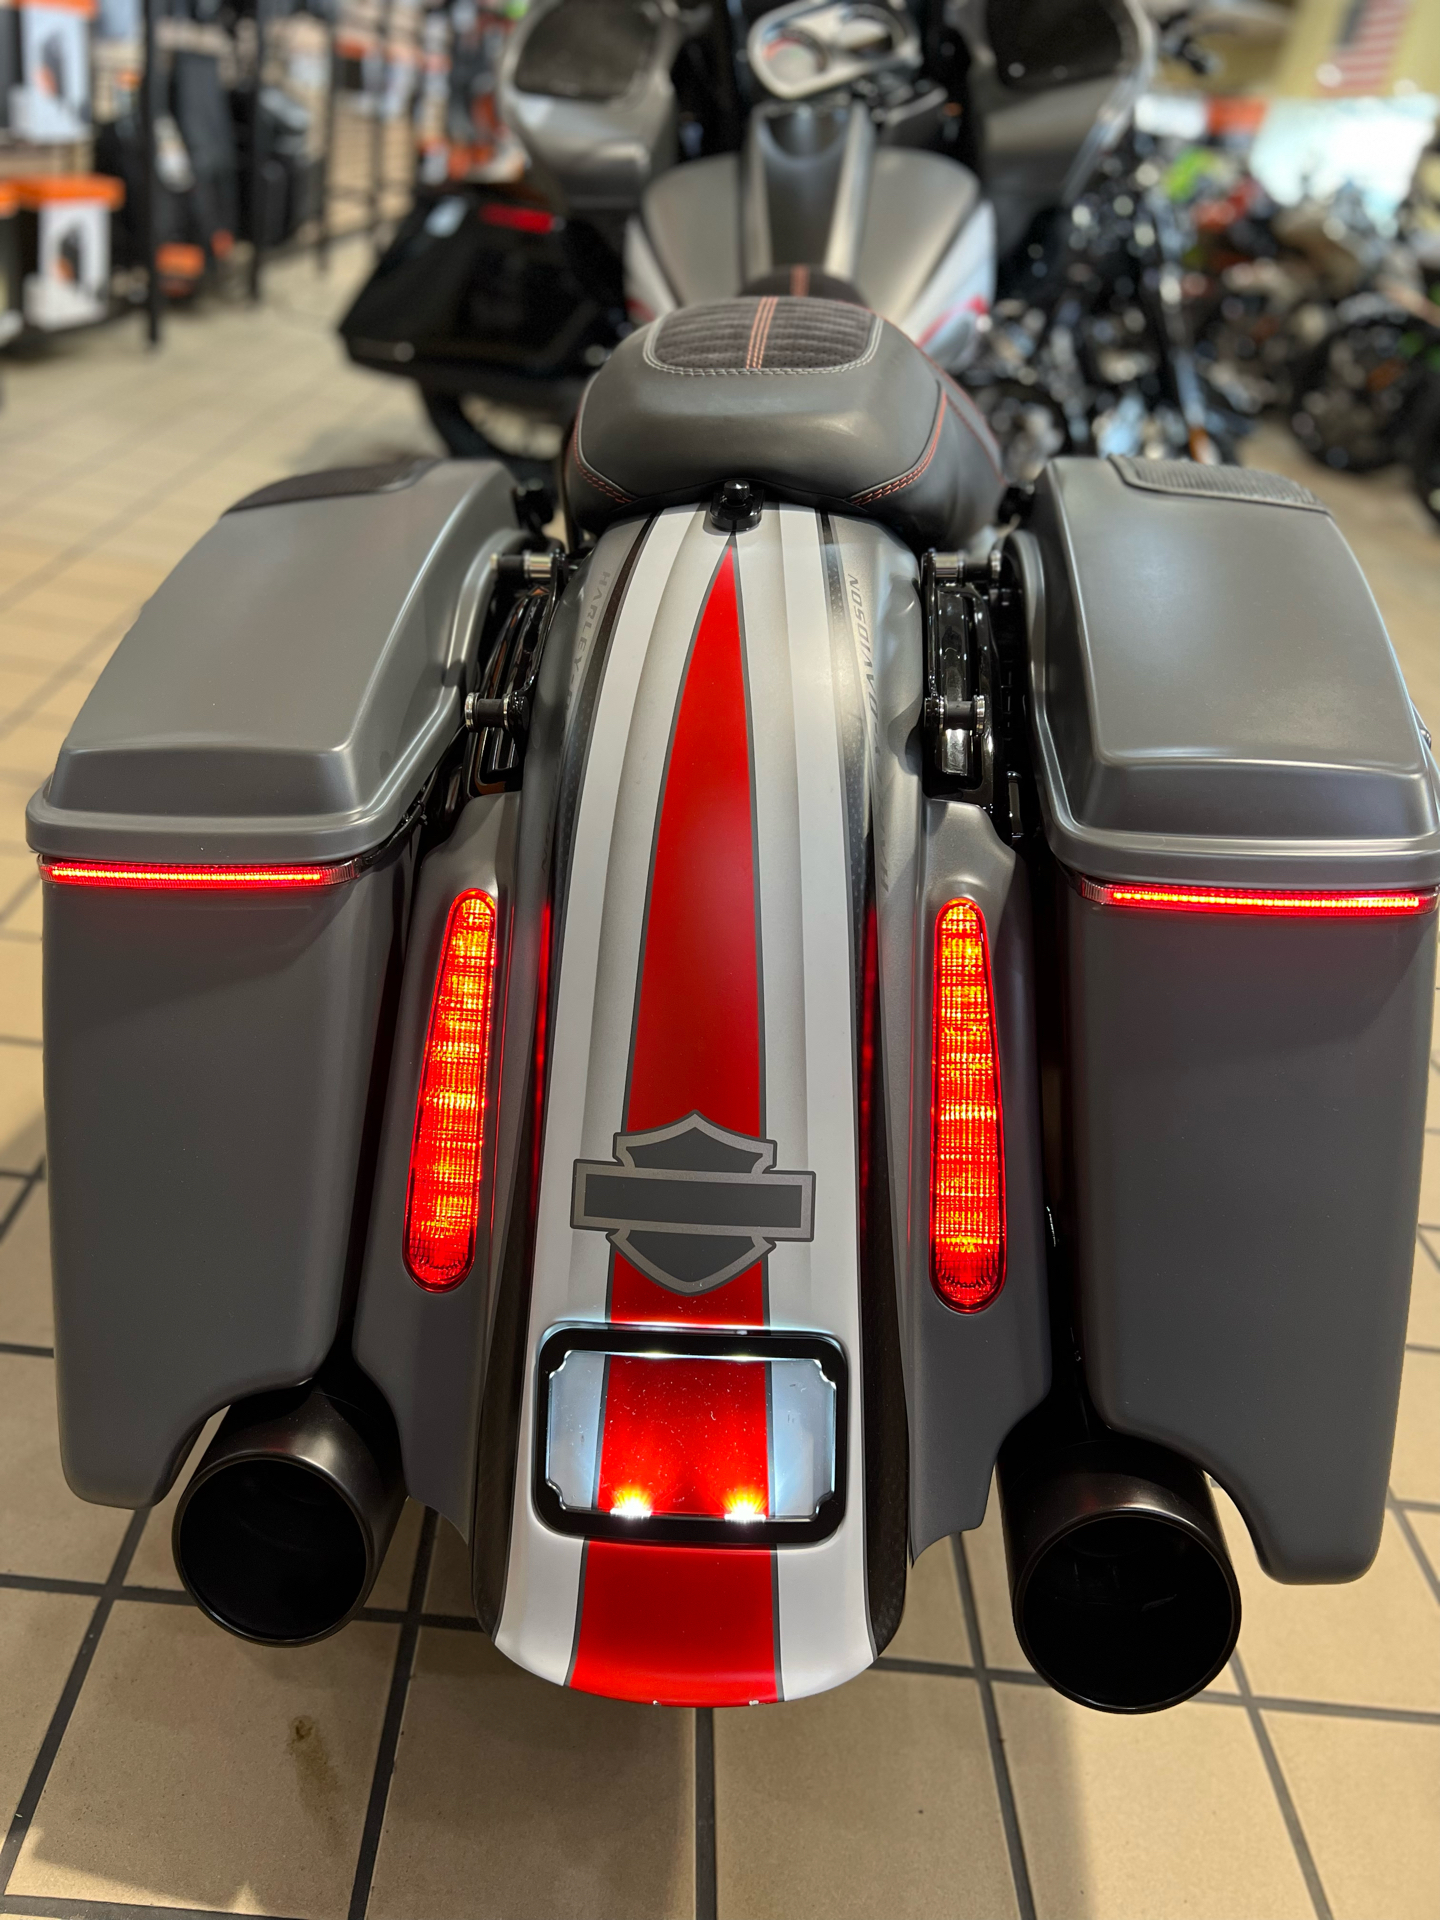 2020 Harley-Davidson ROAD GLIDE SPECIAL in Dumfries, Virginia - Photo 16